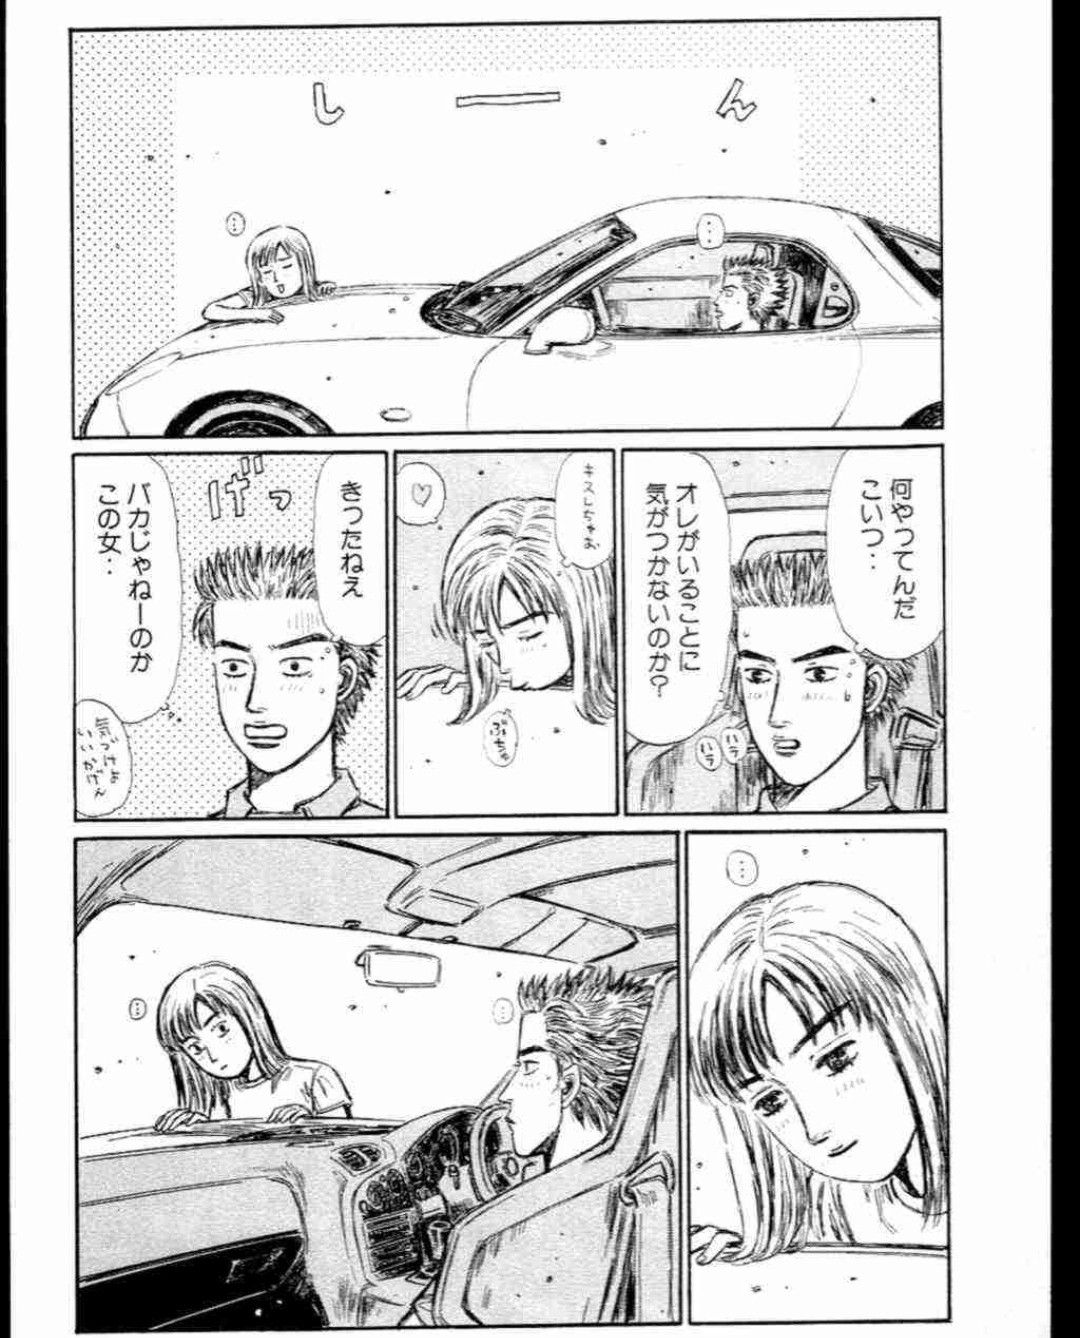 The heroine of the initial D "I'm intermingering, I'm a senior and etch rolled up" 9